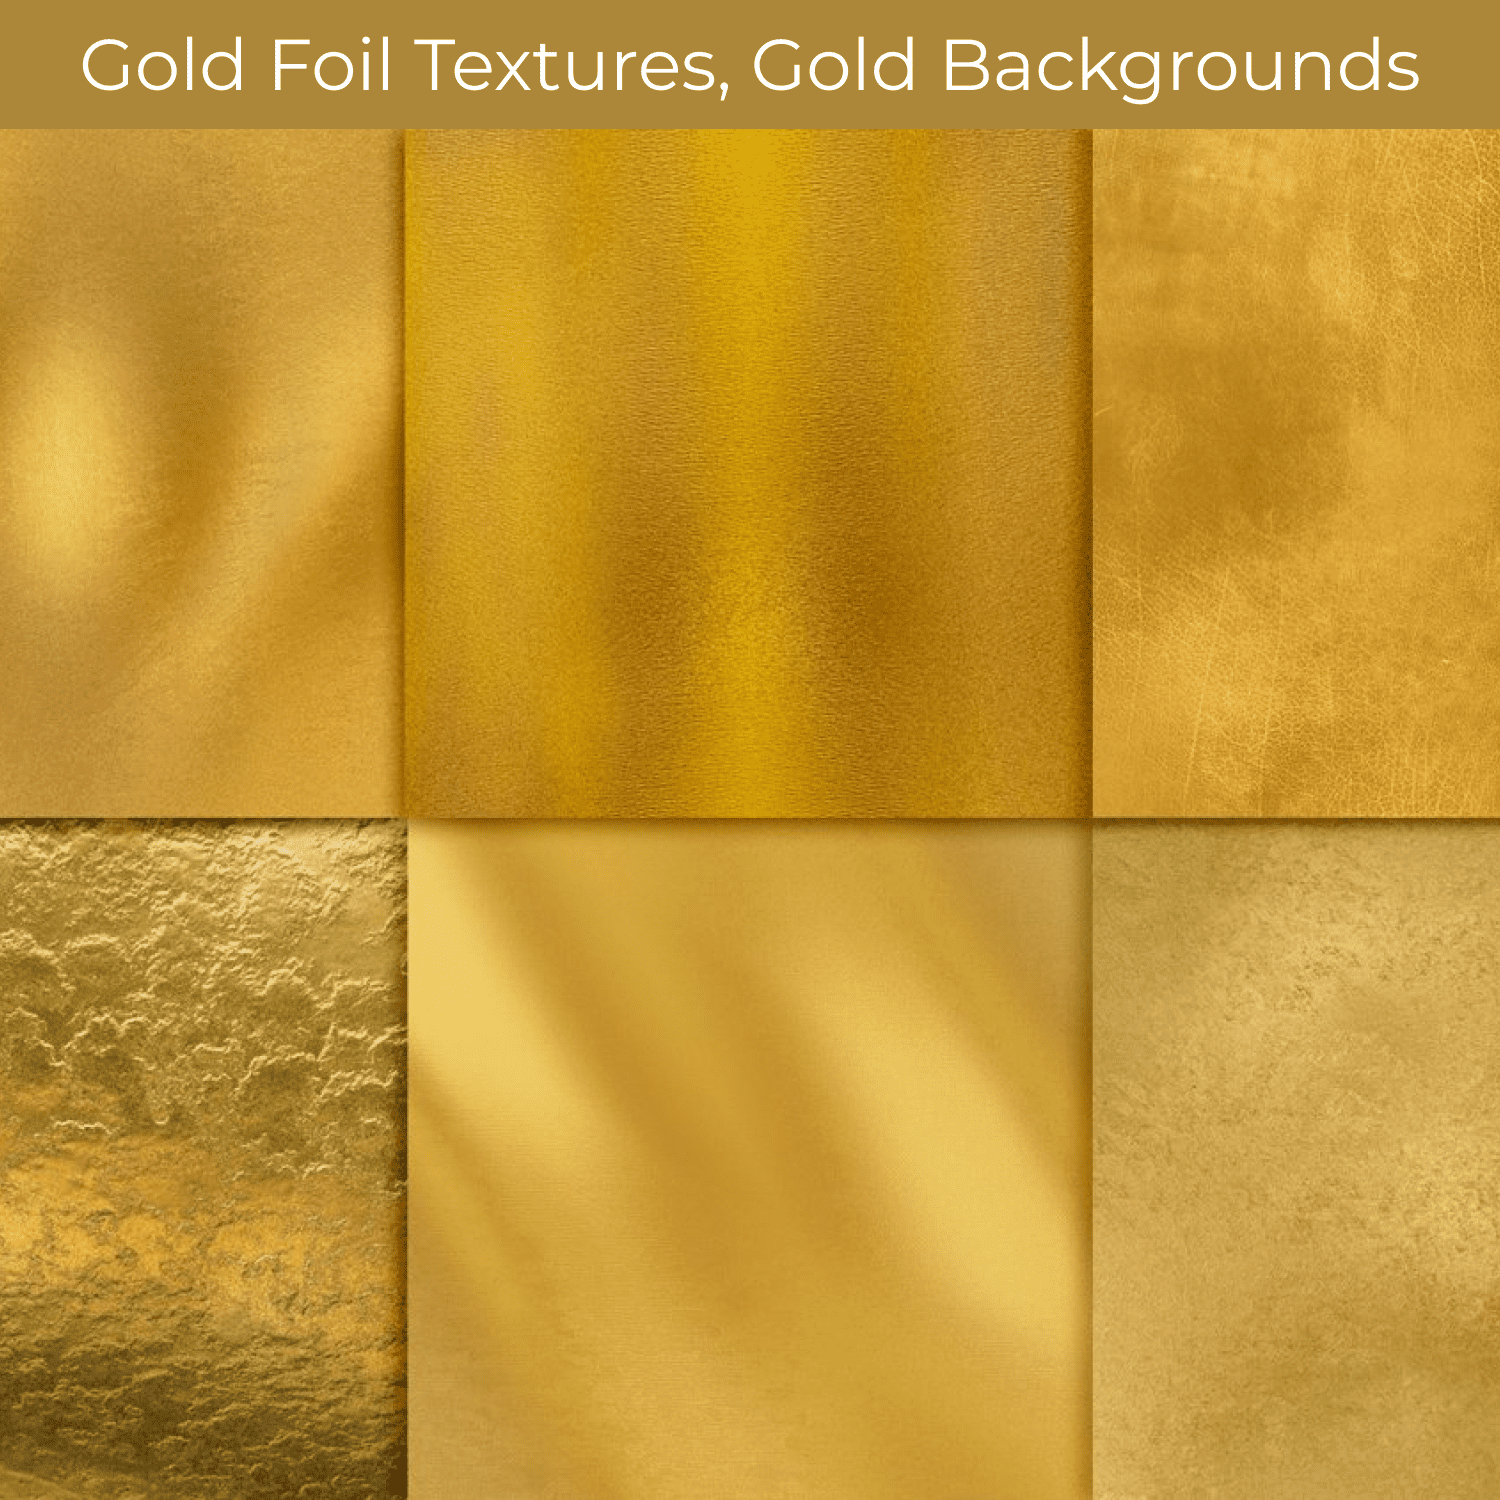 Gold Foil Textures, Gold Backgrounds cover.